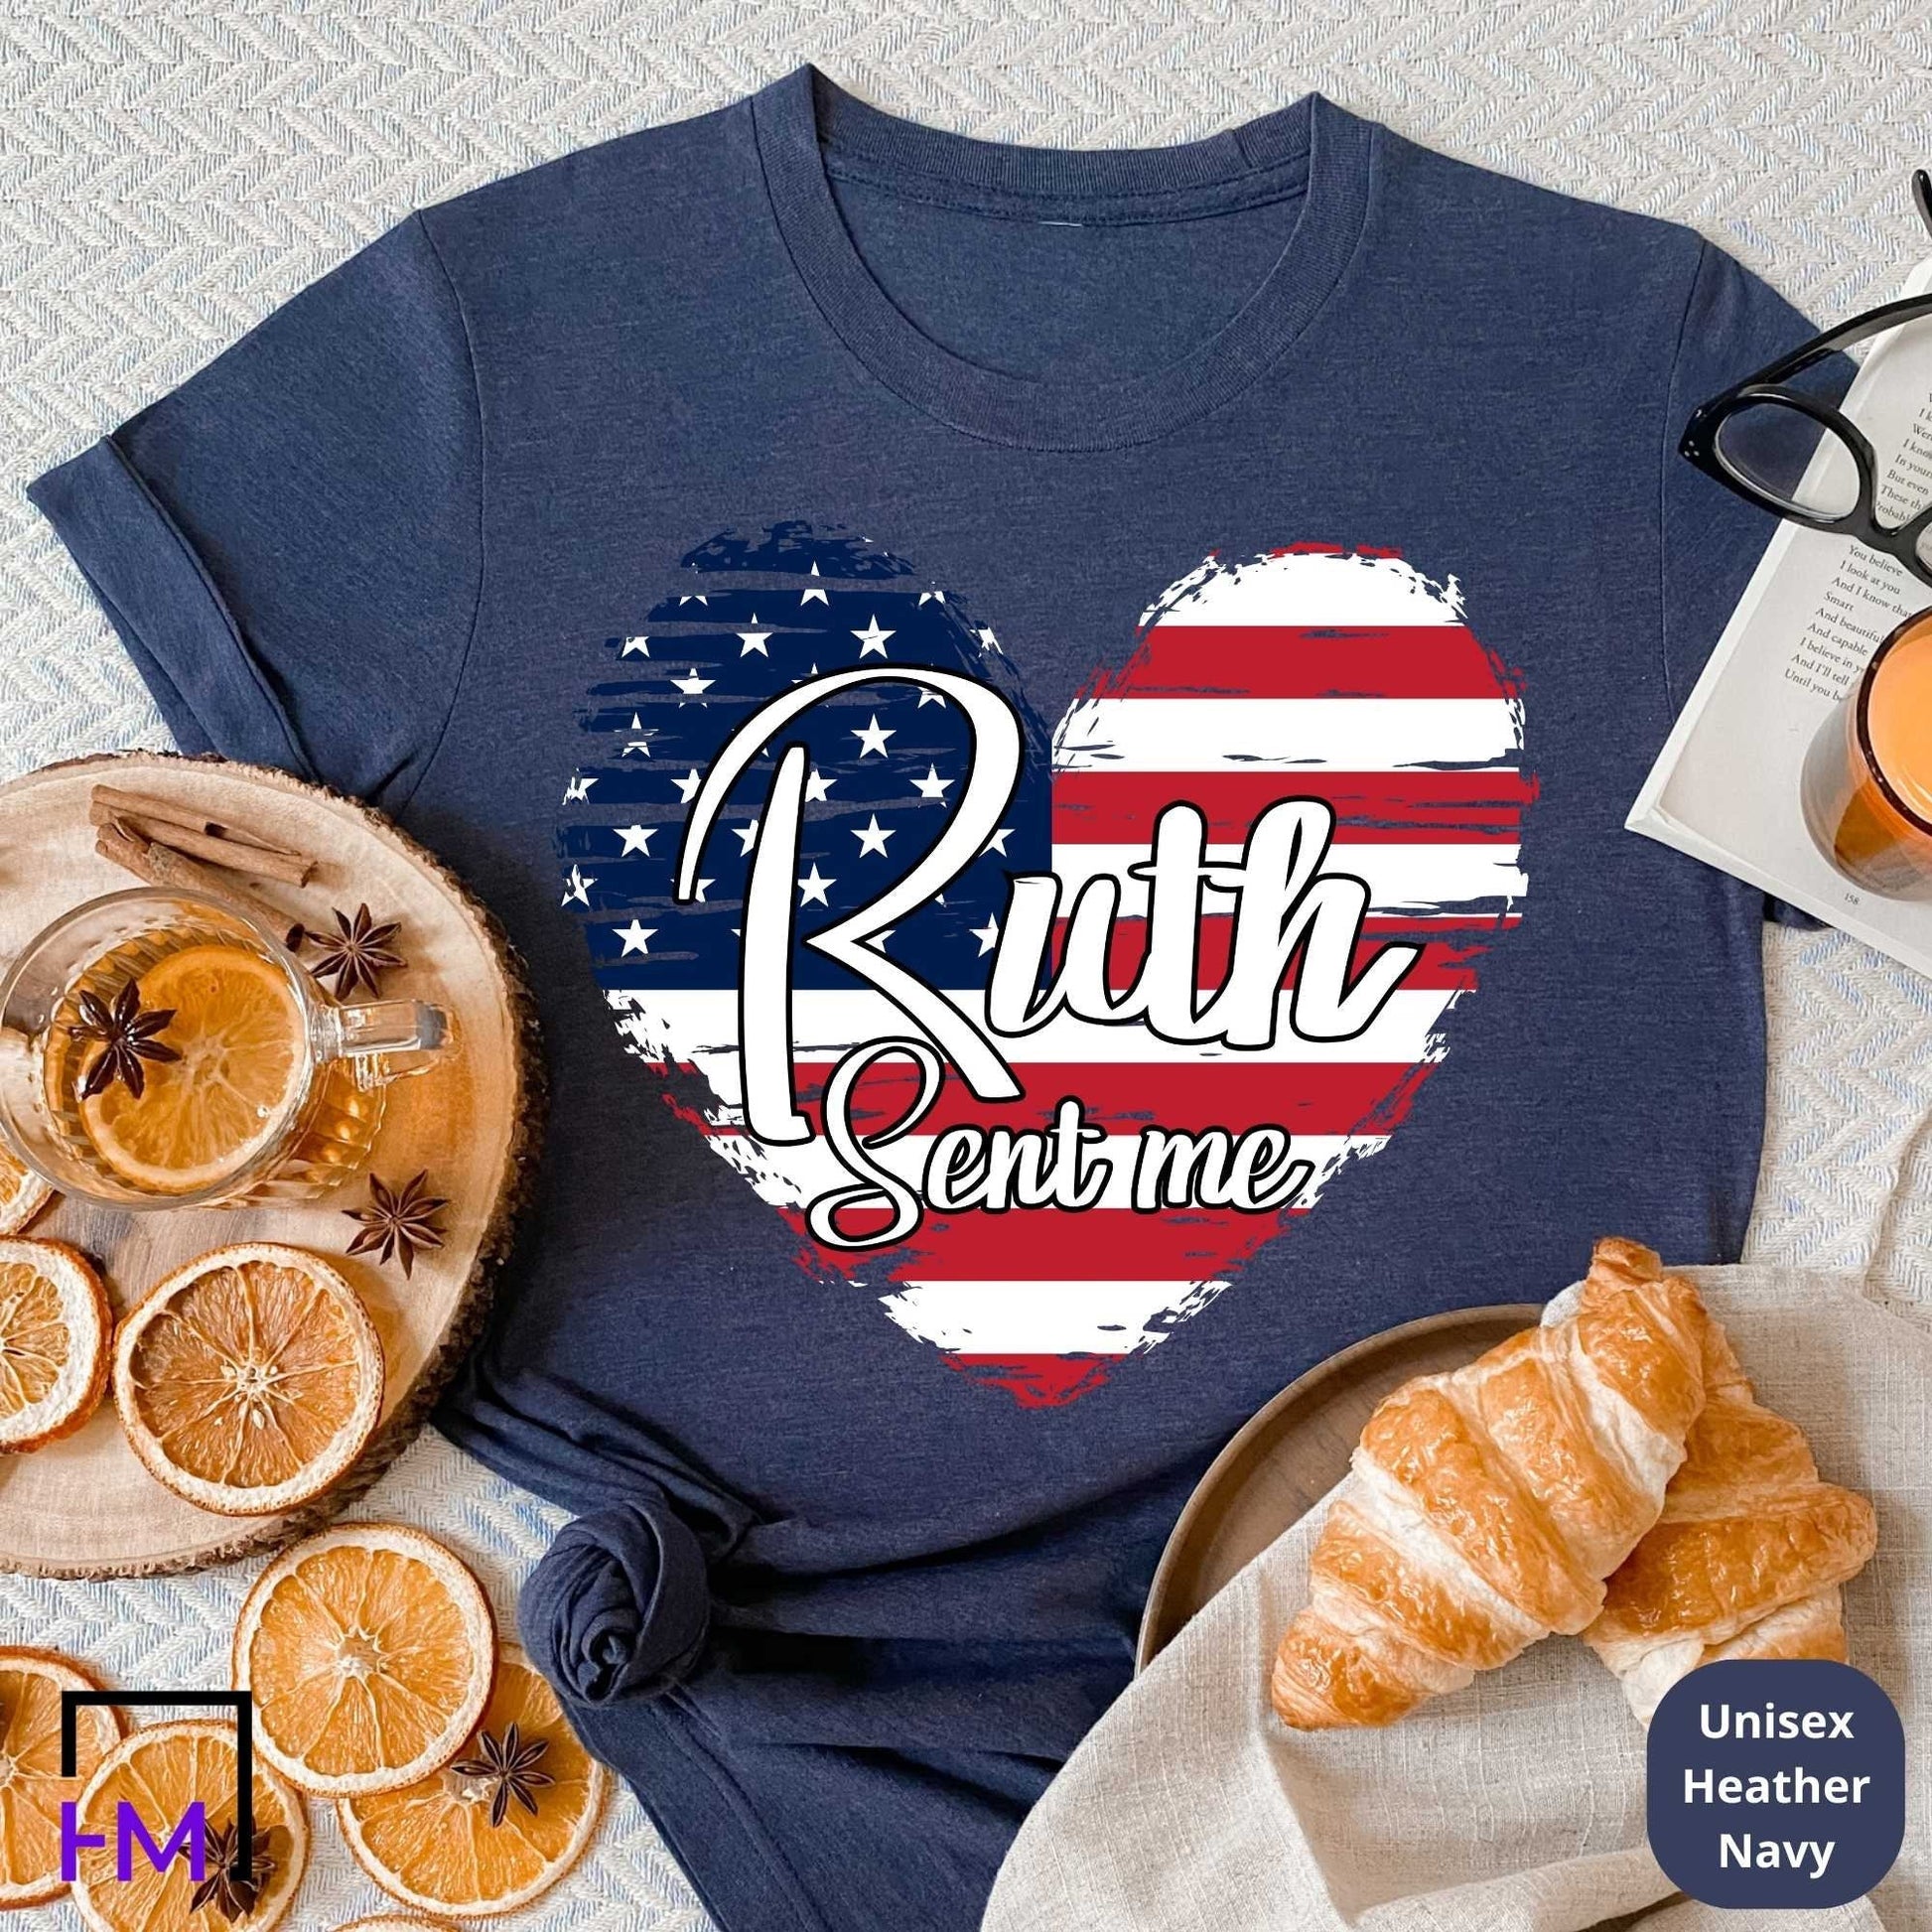 Ruth Sent Me Shirt| Vote For Women's Equality, Human Rights, Reproductive, Feminism, Feminist Election, Political Tops, Tees & Sweatshirts HMDesignStudioUS